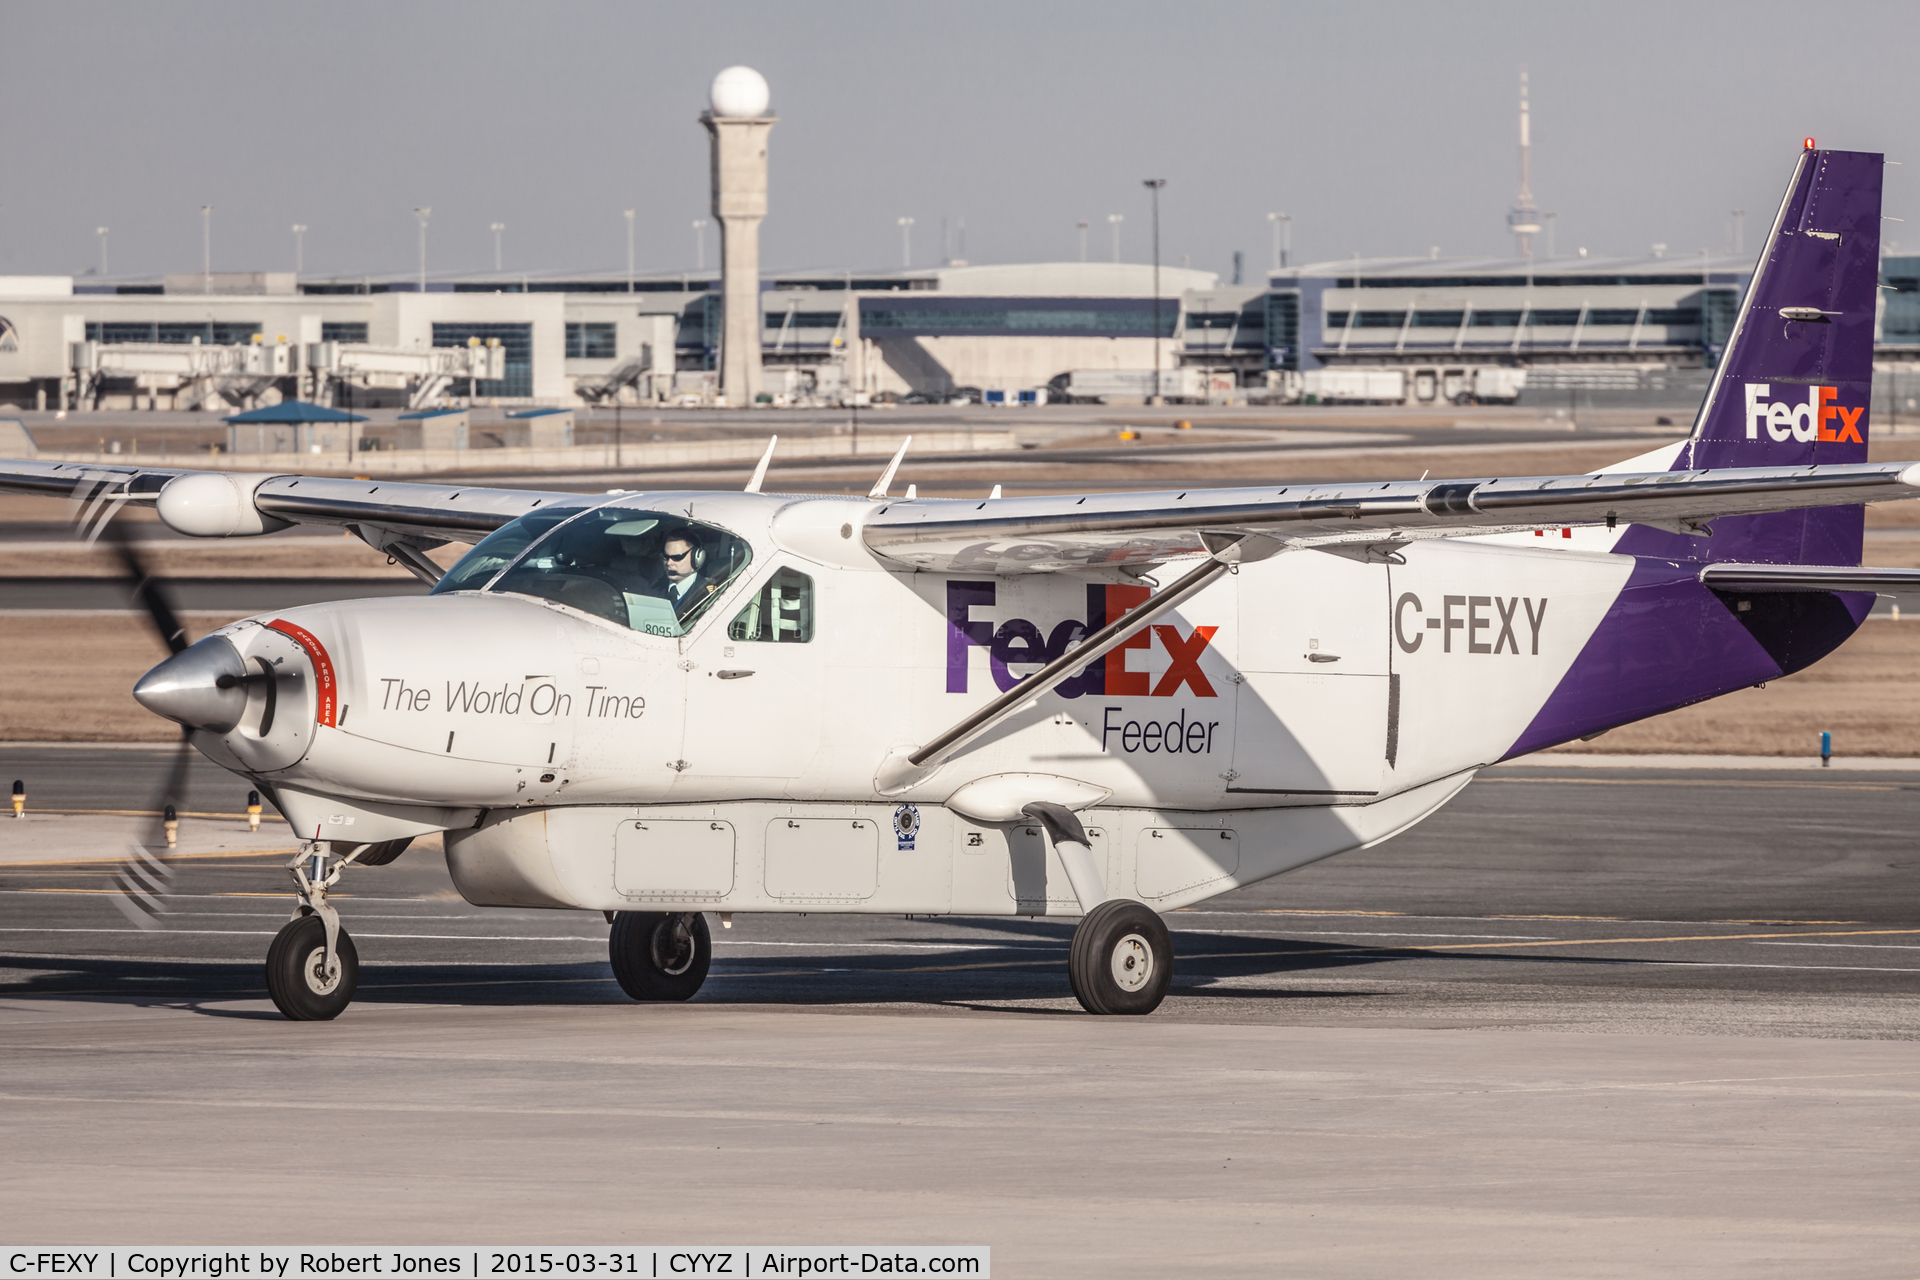 C-FEXY, 1990 Cessna 208B Super Cargomaster C/N 208B0226, It's FEXY and it knows it.